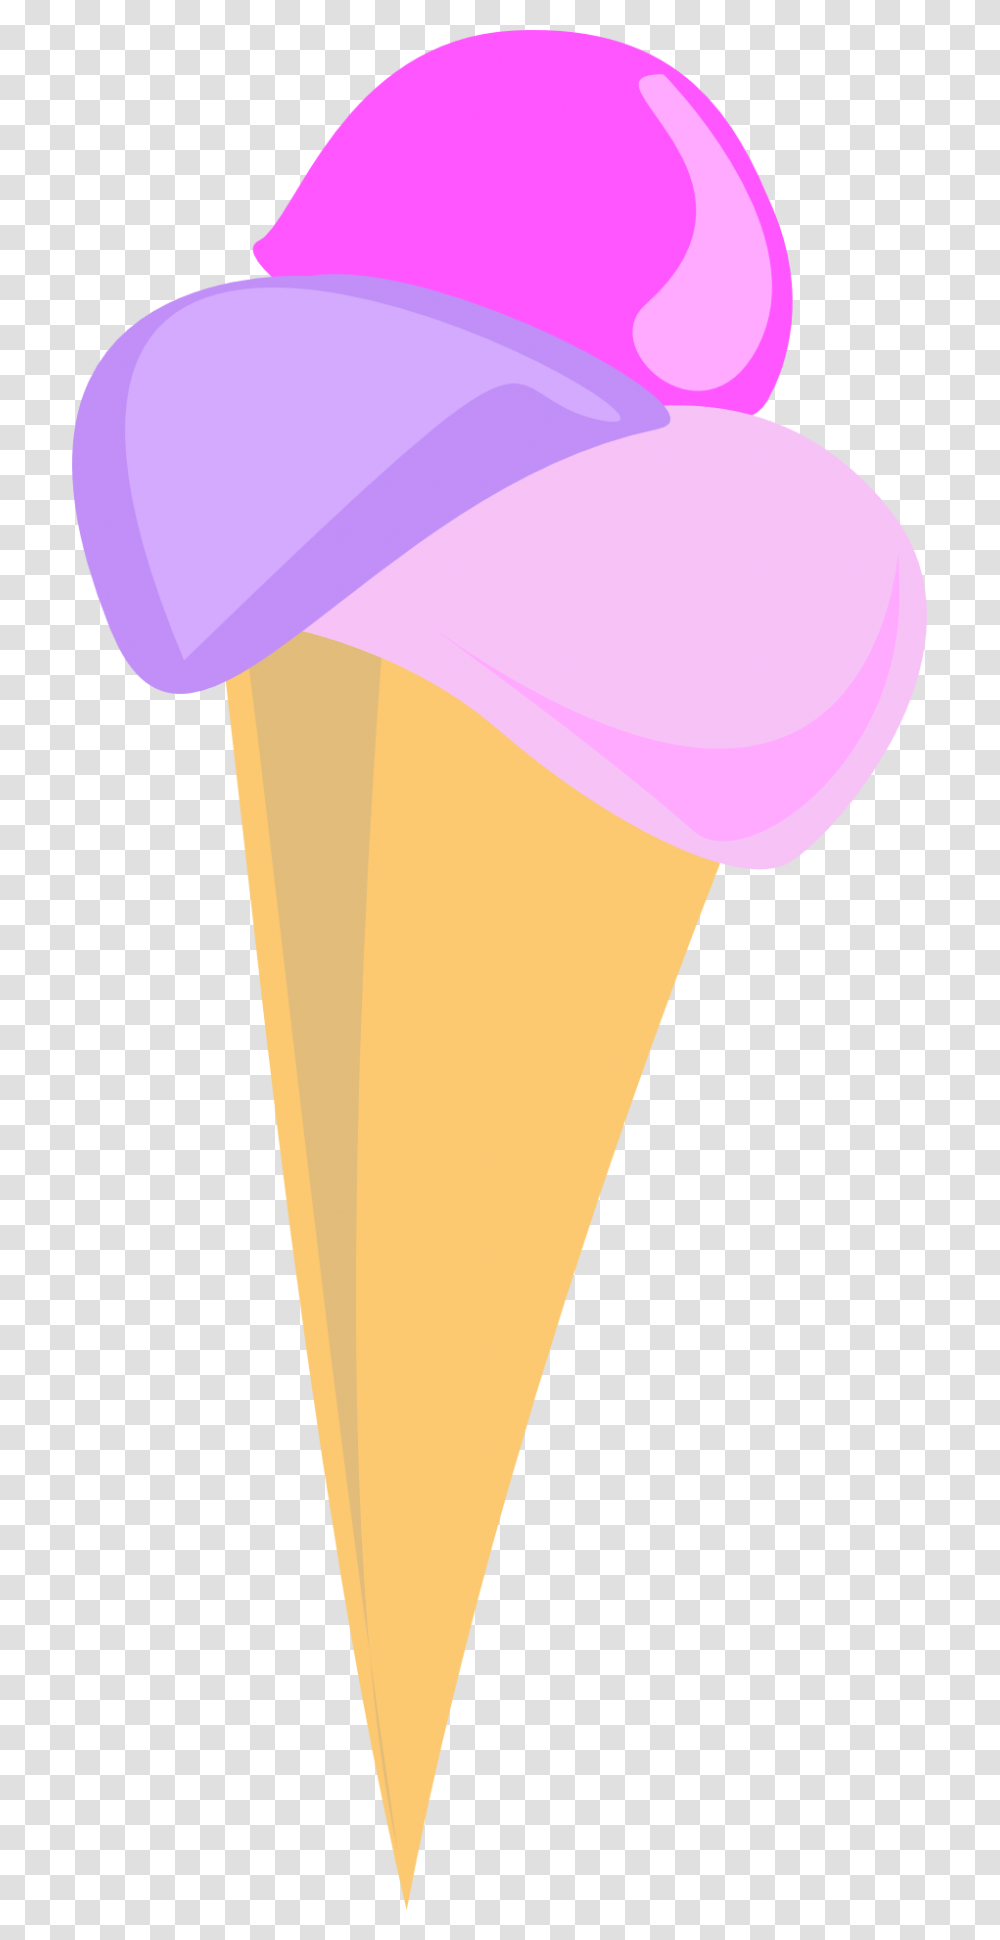 New Ipswich Library Ice Cream Social New Ipswich Library, Cone, Baseball Cap, Hat Transparent Png